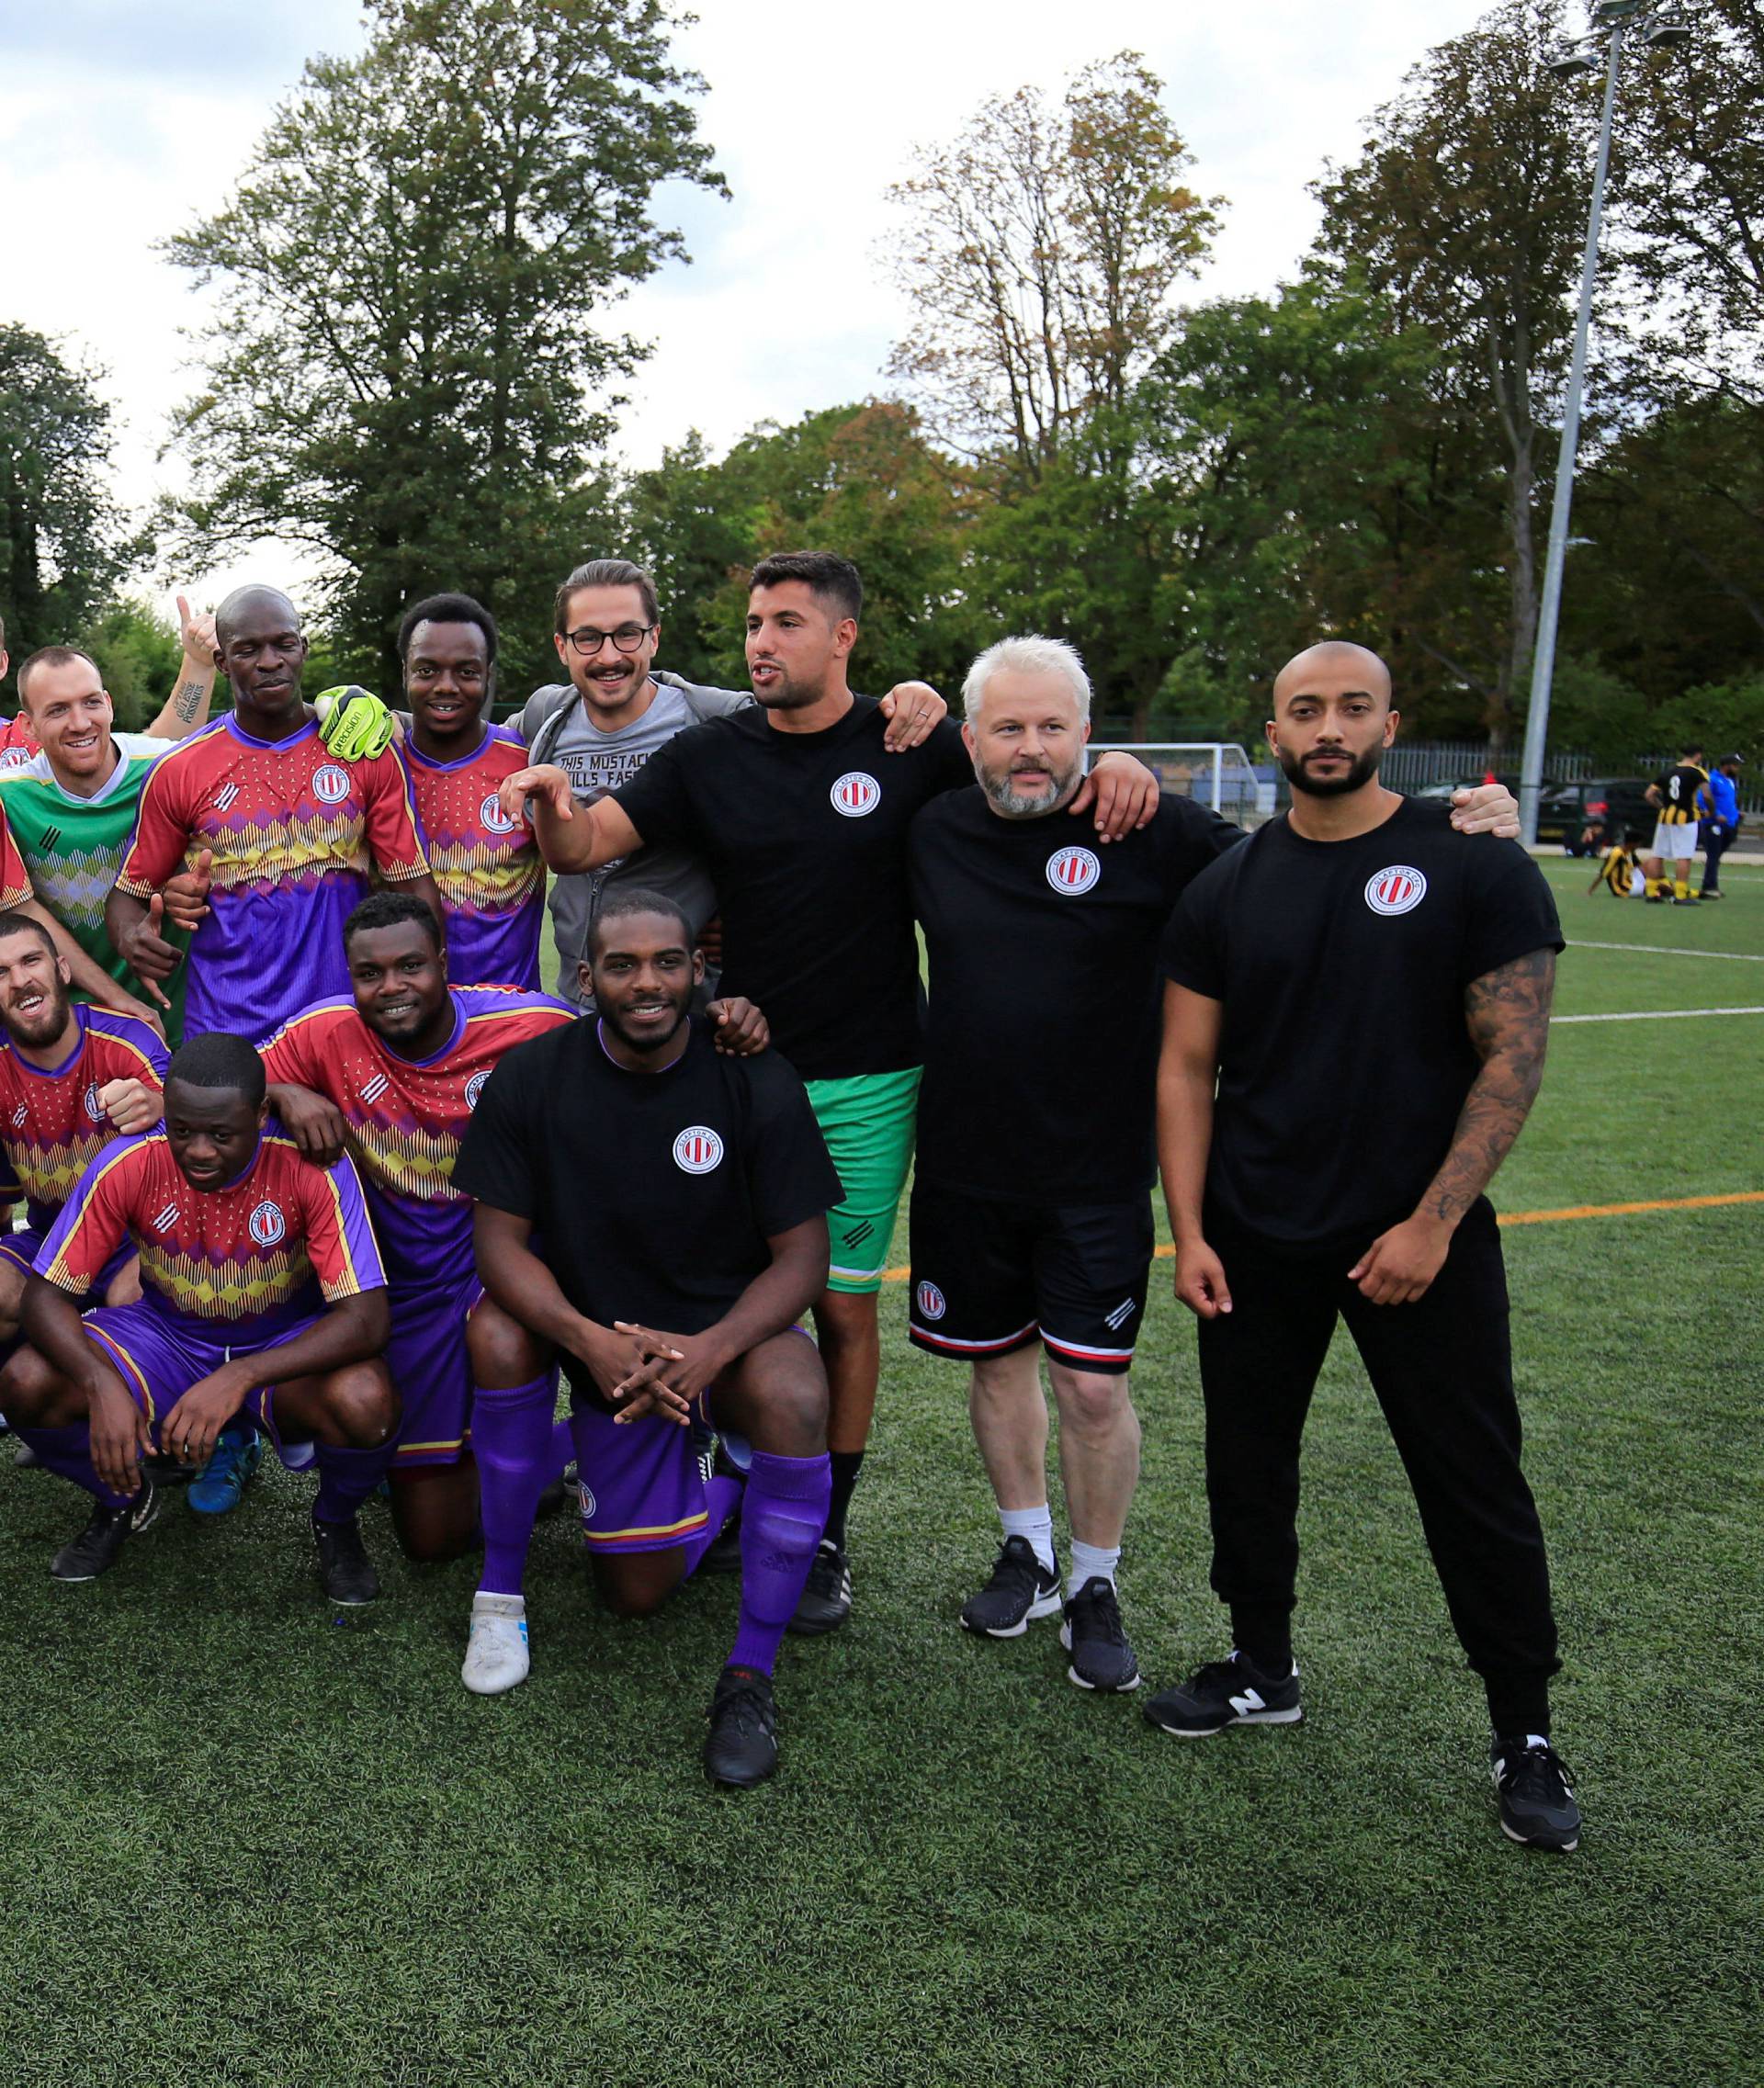 Clapton CFC players pose for pictures after winning their away game against Ealing Town in East Acton, in London